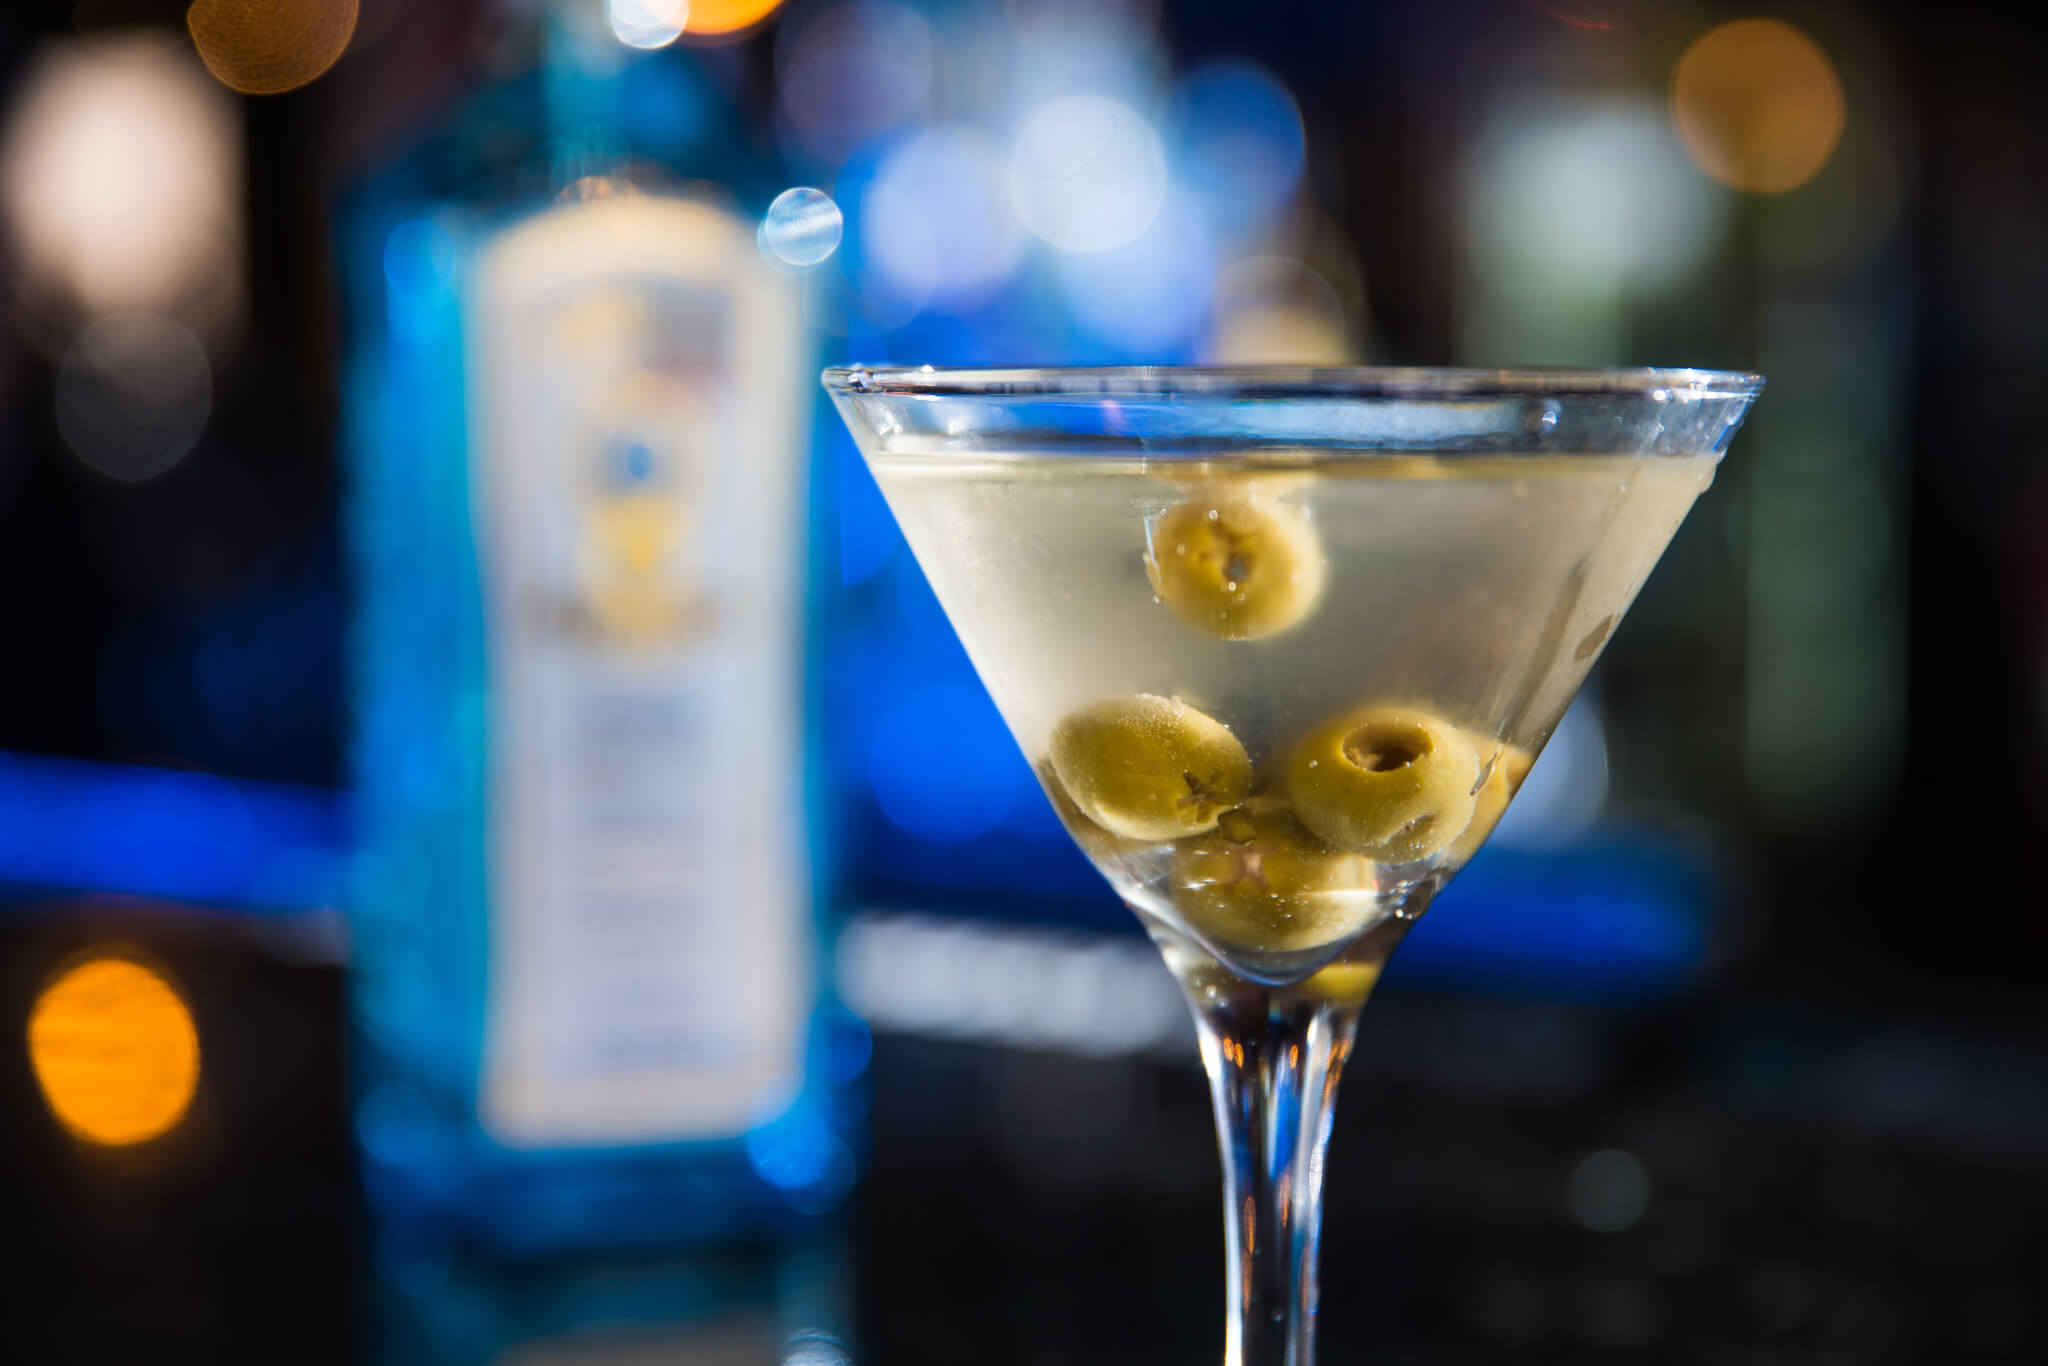 The Best Martini Glasses, According to Experts